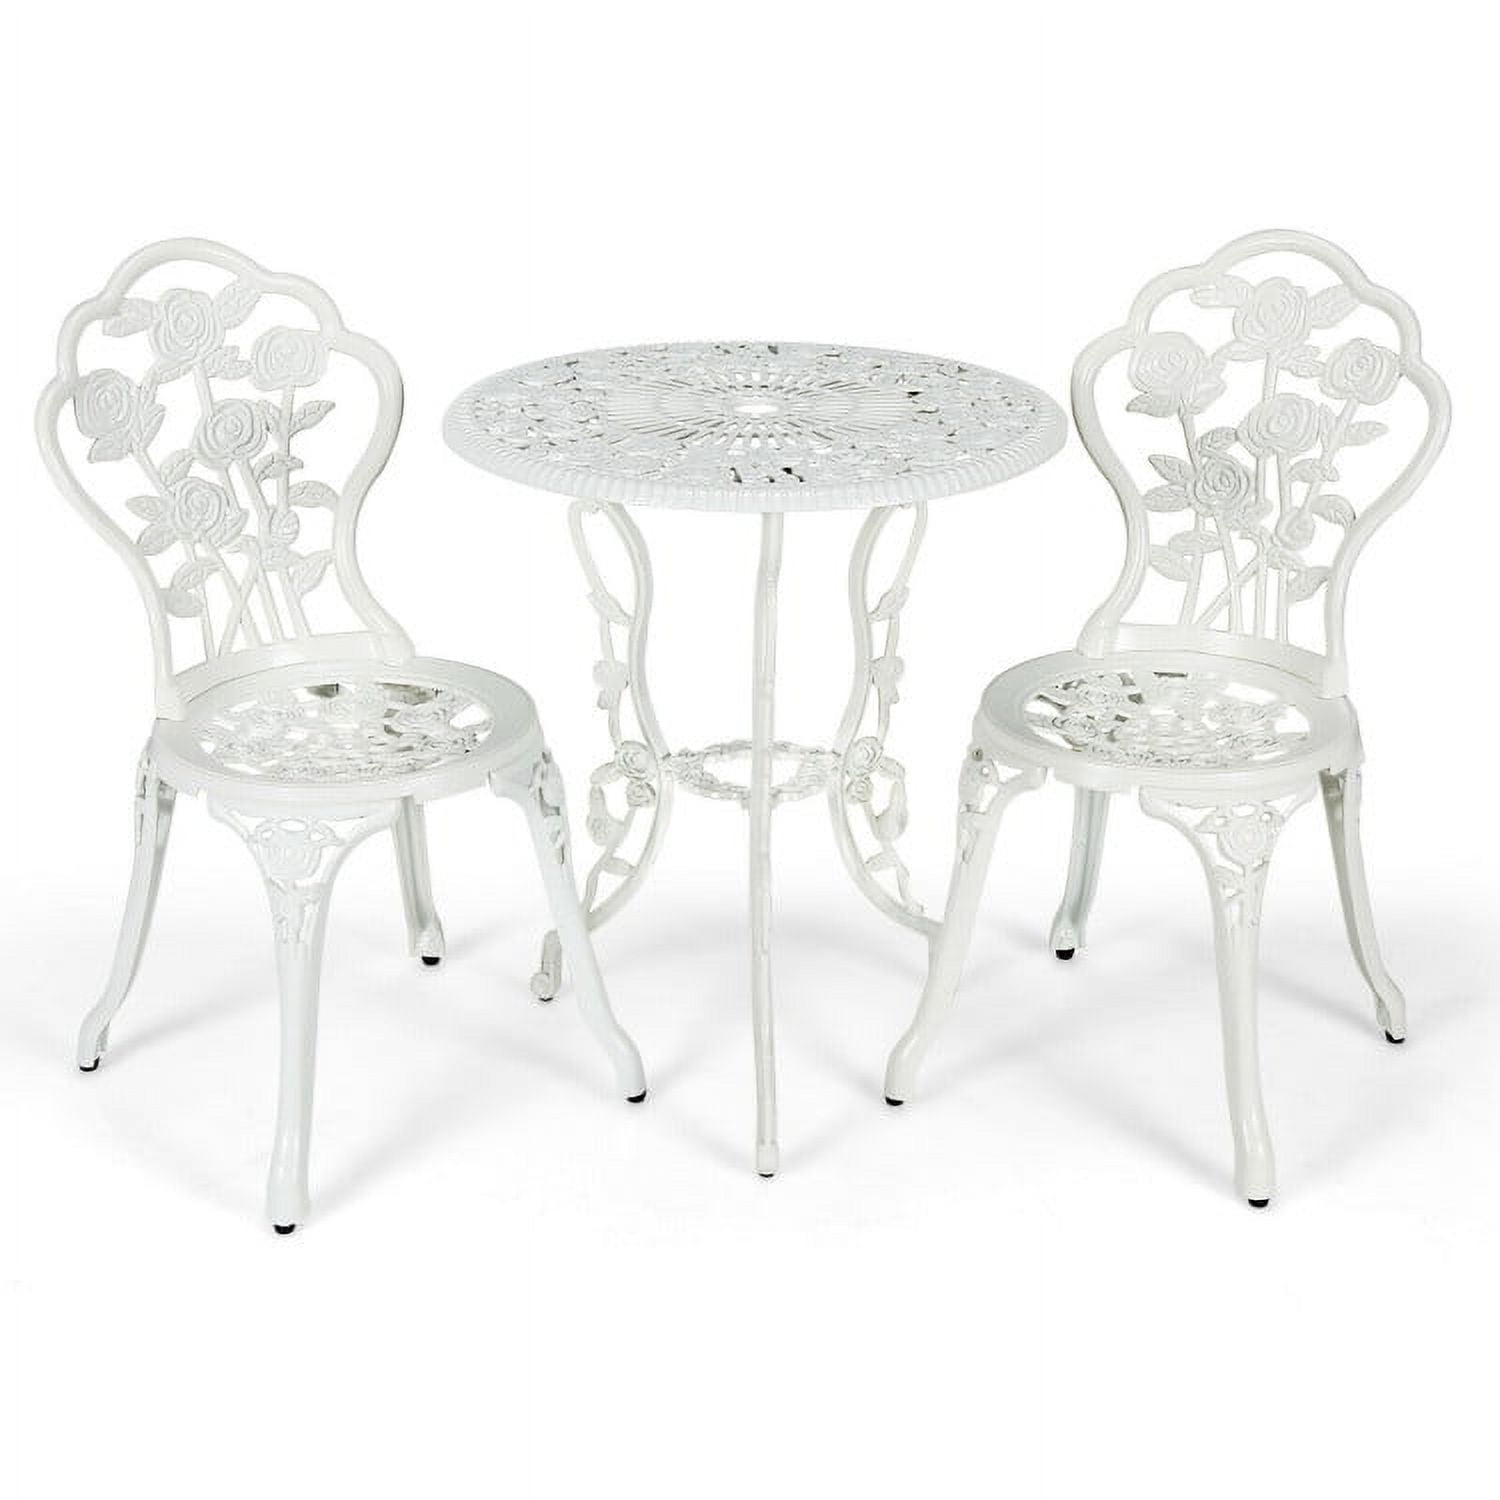 Aimee Lii Outdoor Patio Furniture Set, Cast Aluminum Patio Table Chairs Set with Rose Design, White